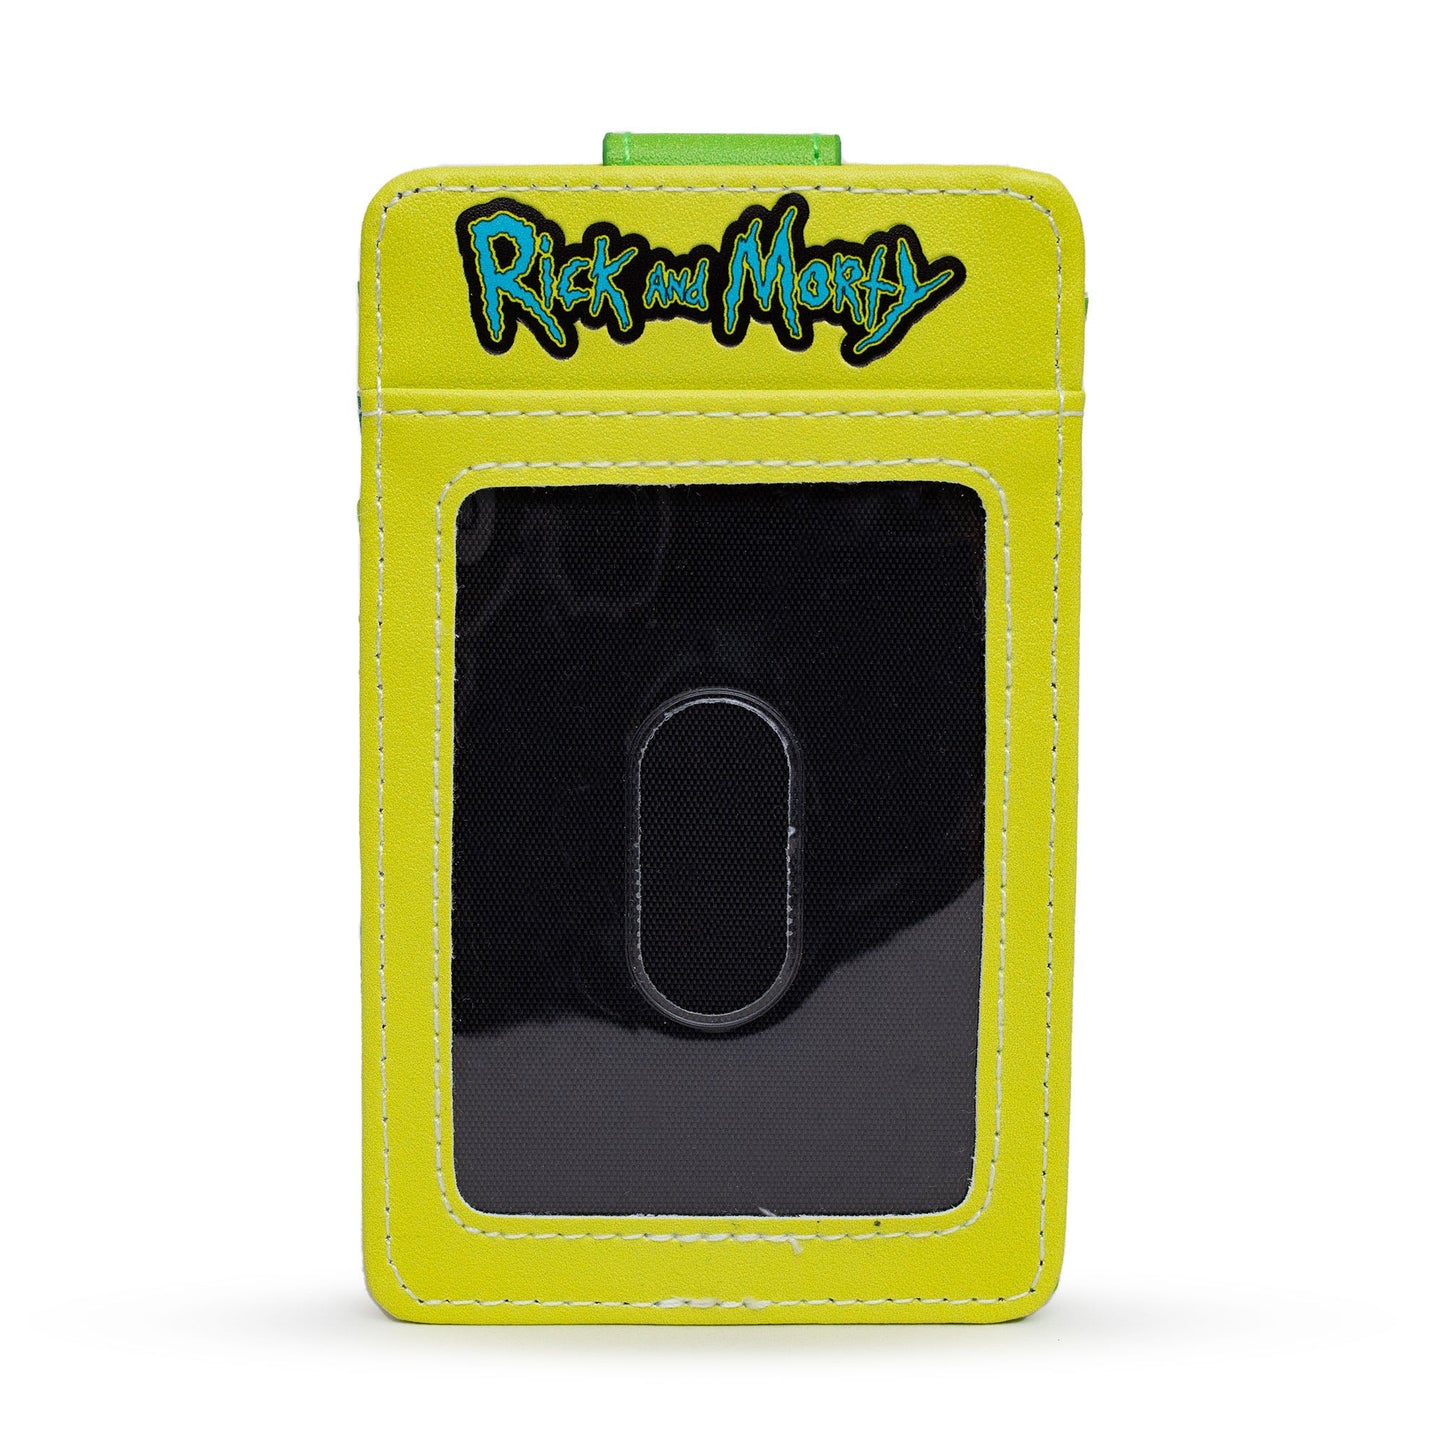 Rick and Morty Wallet, Character Wallet ID Card Holder, Rick and Morty Rick Face Yellow Green, Vegan Leather